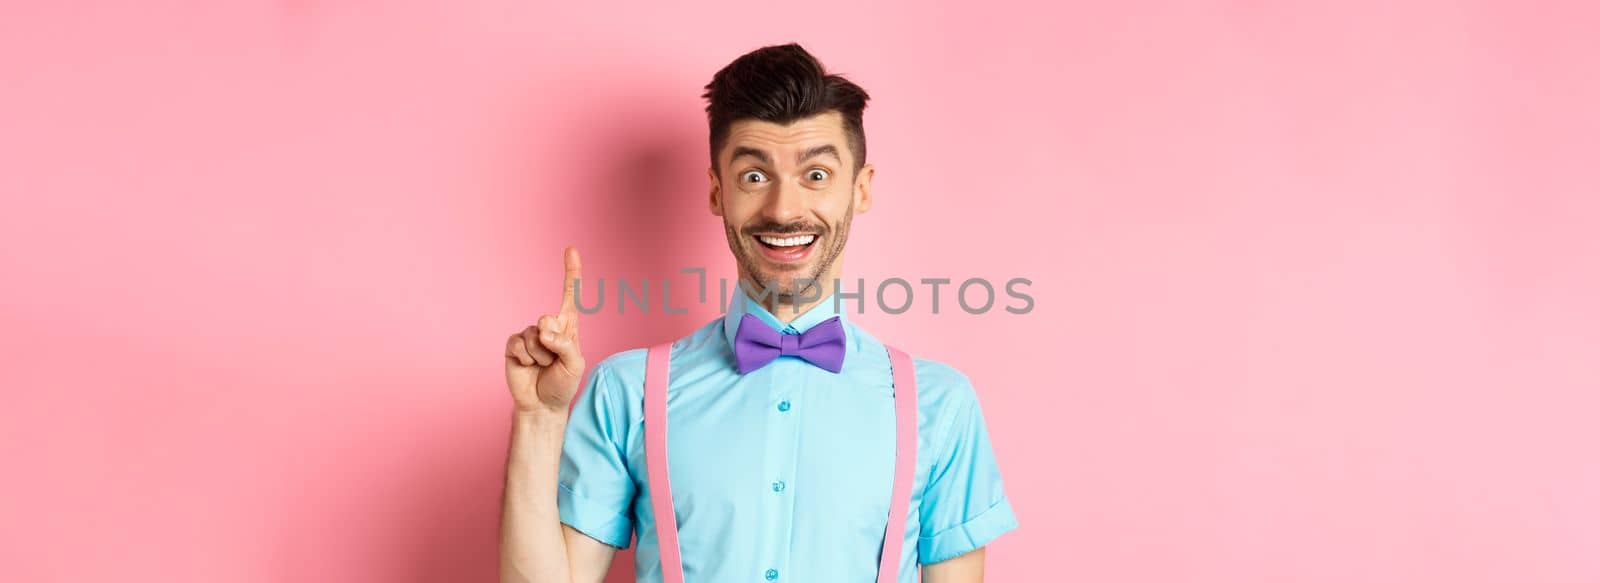 Cheerful caucasian man pitching an idea, raising finger in eureka gesture and smiling, suggesting solution, standing on pink background.